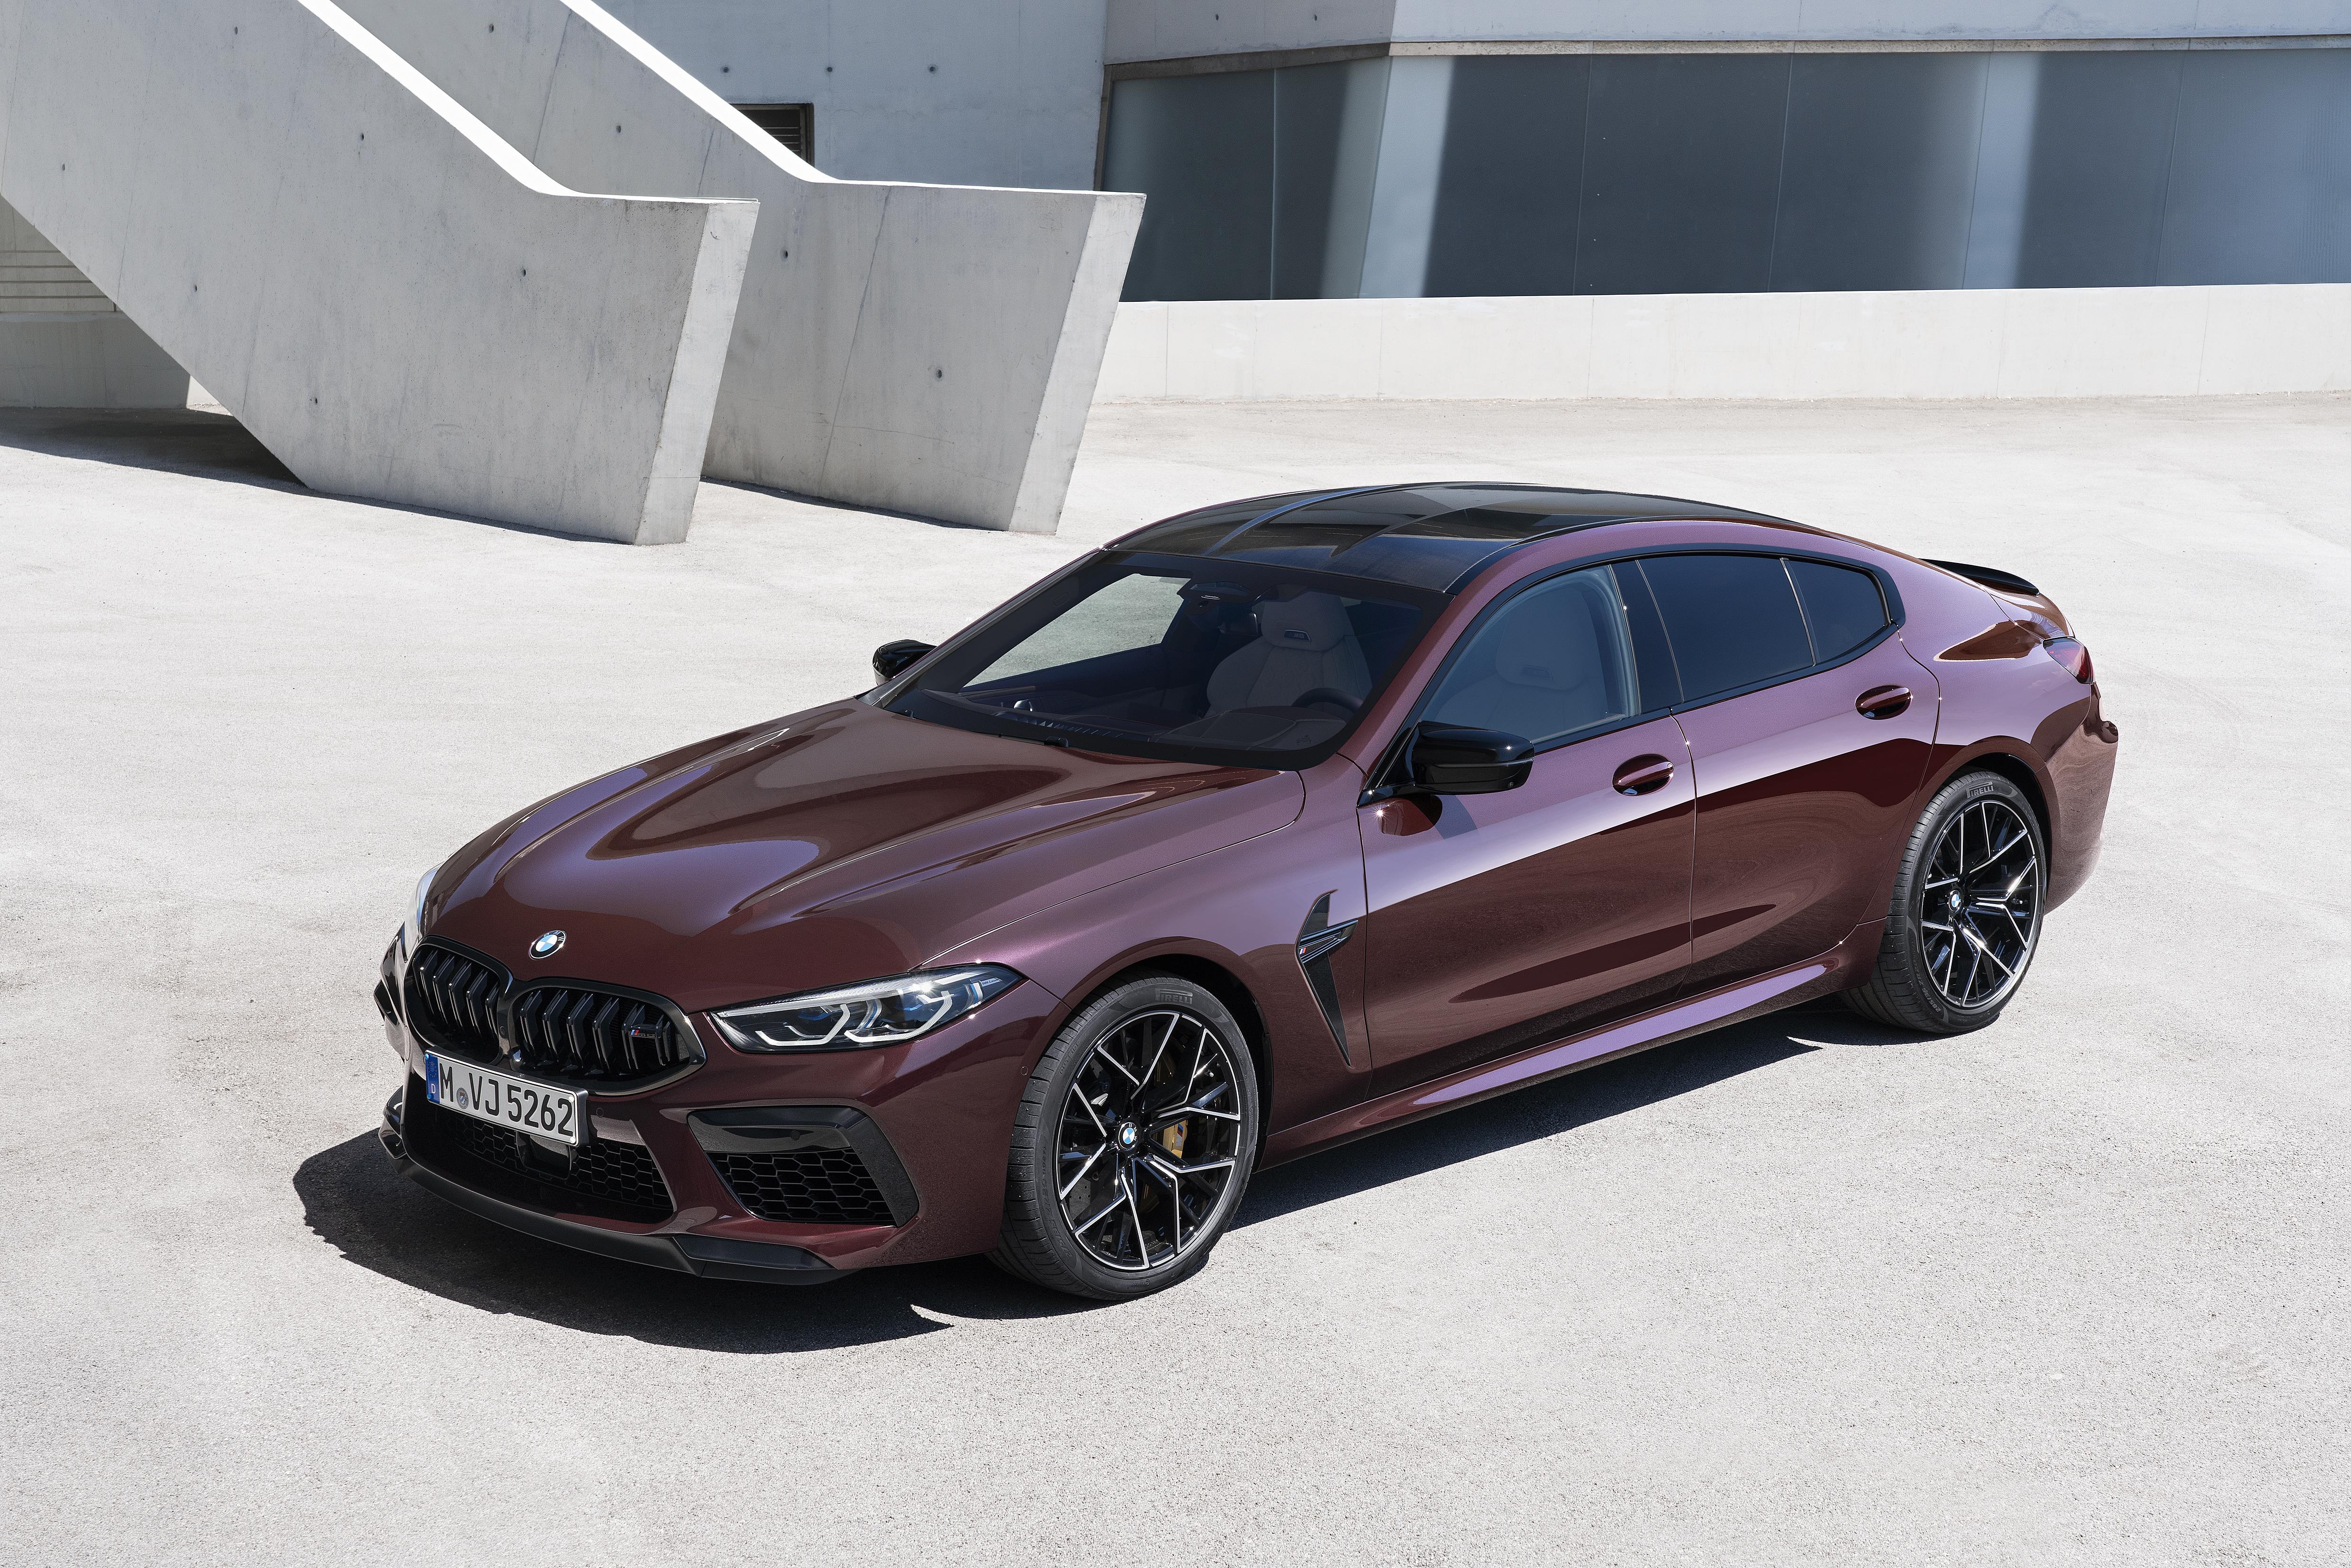 Bmw 8 competition. BMW m8 Gran Coupe. BMW m8 Coupe 2020. BMW m8 Gran Coupe 2020. BMW m8 Gran Coupe Competition 2020.